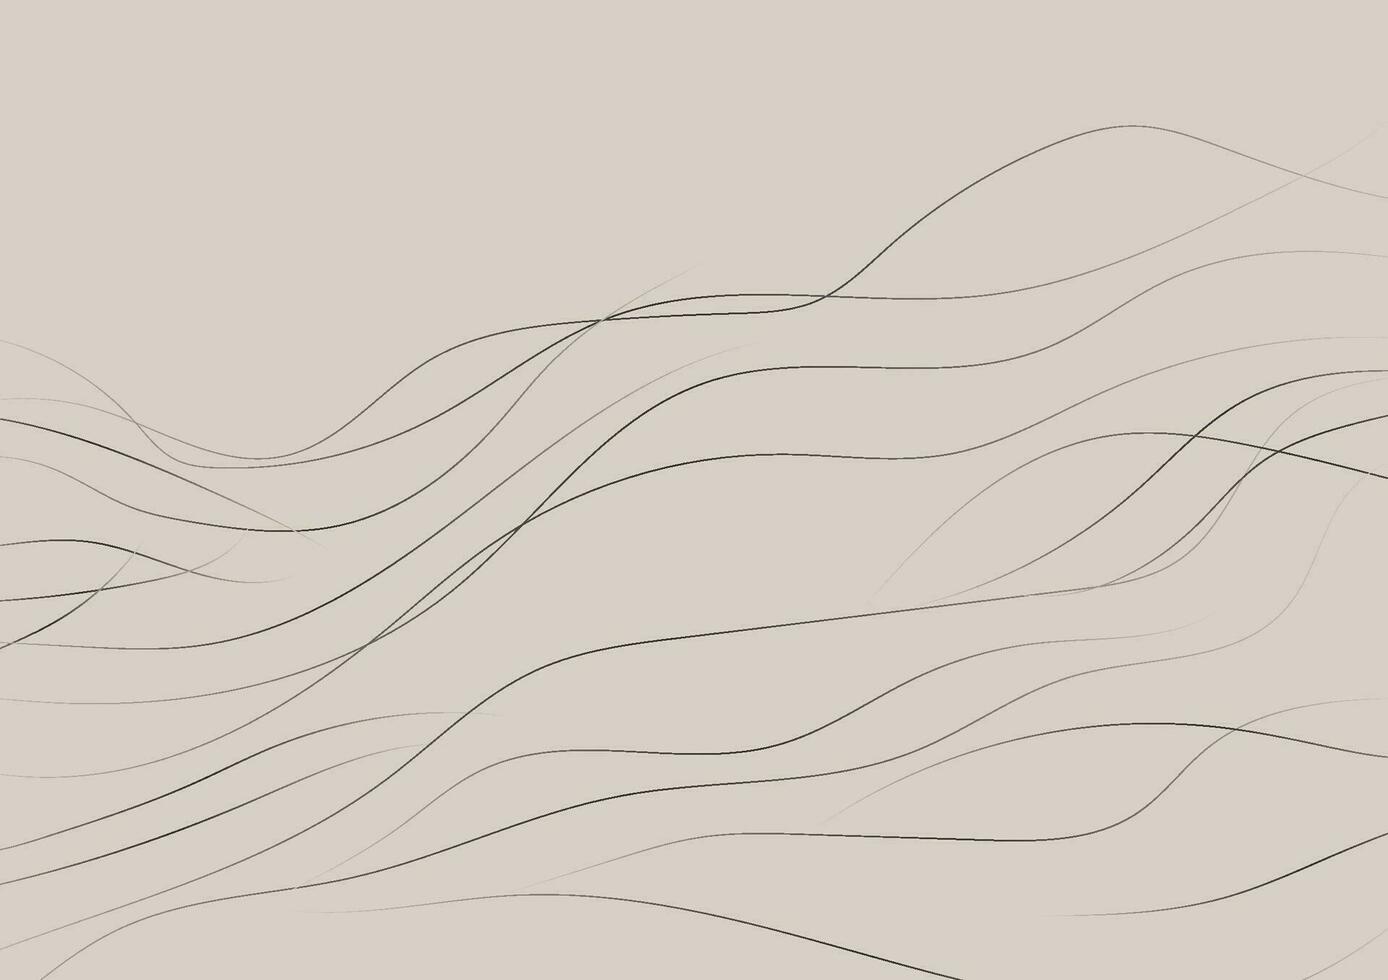 Abstract art background The lines are arranged in order to design the background using brown. To look minimal and modern. Suitable for wallpaper, posters, and fabric patterns. vector